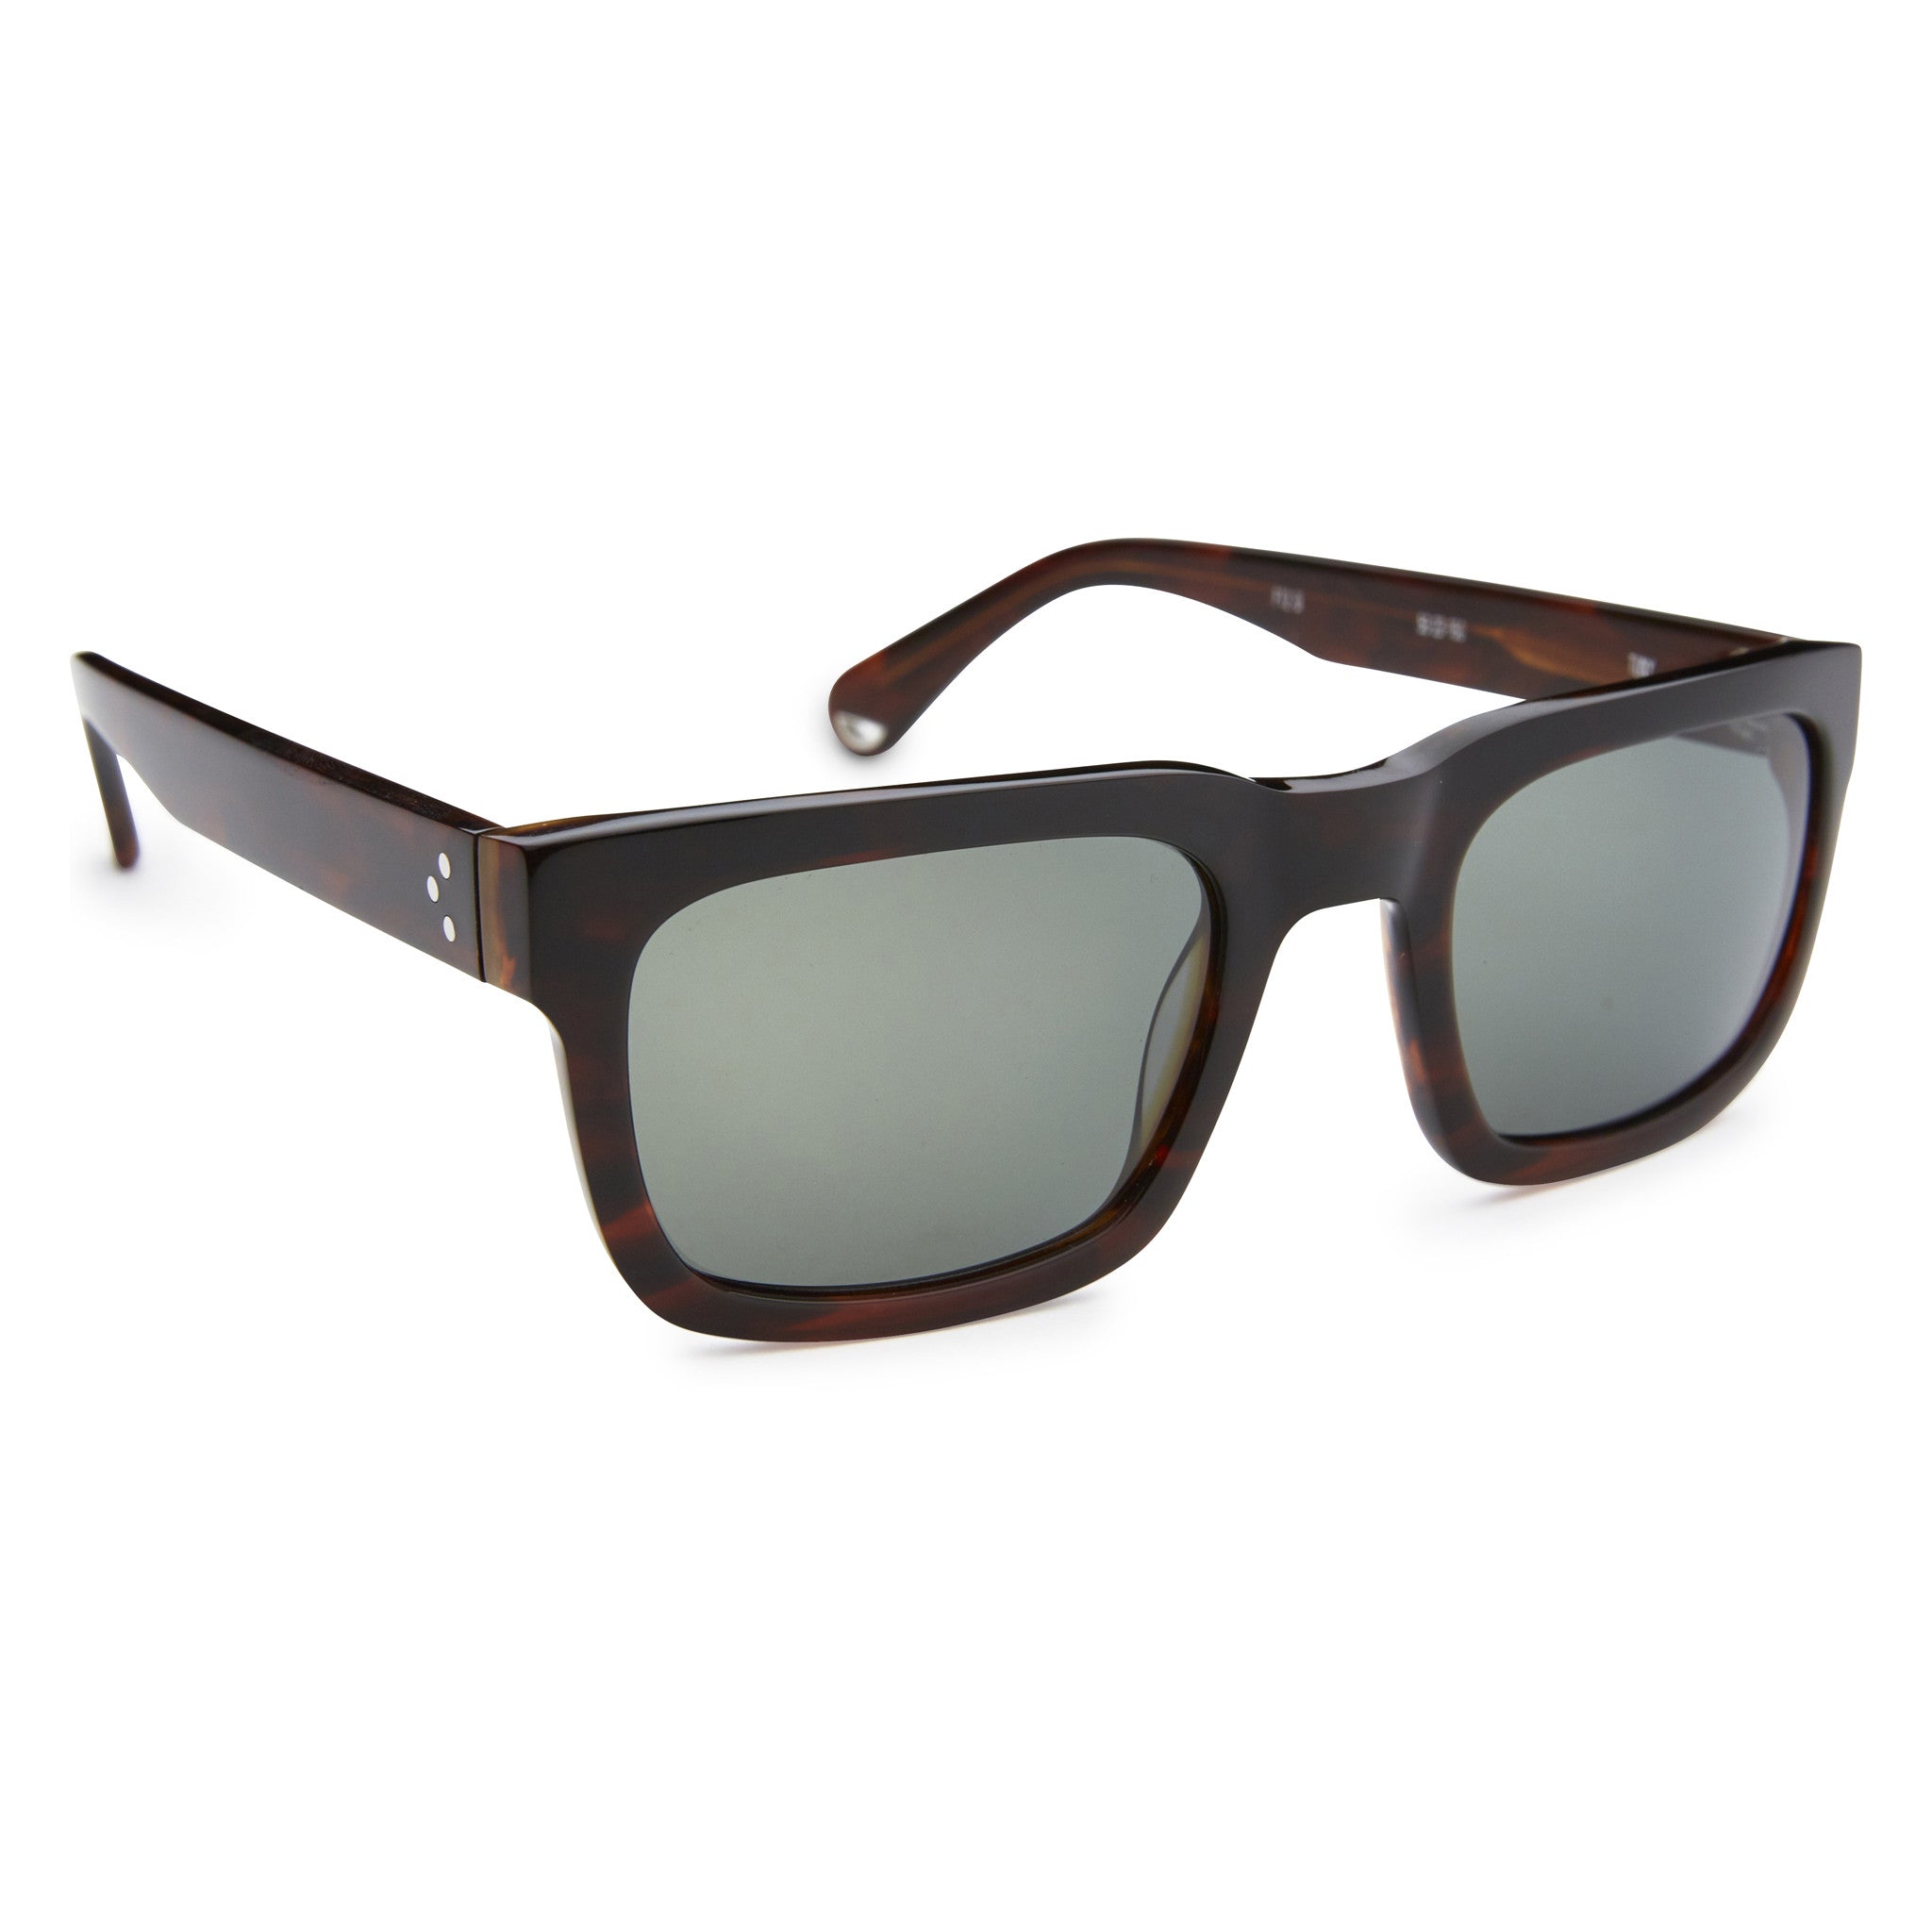 Pacifico Optical Tony - Burnt Toffee with Grey Lens